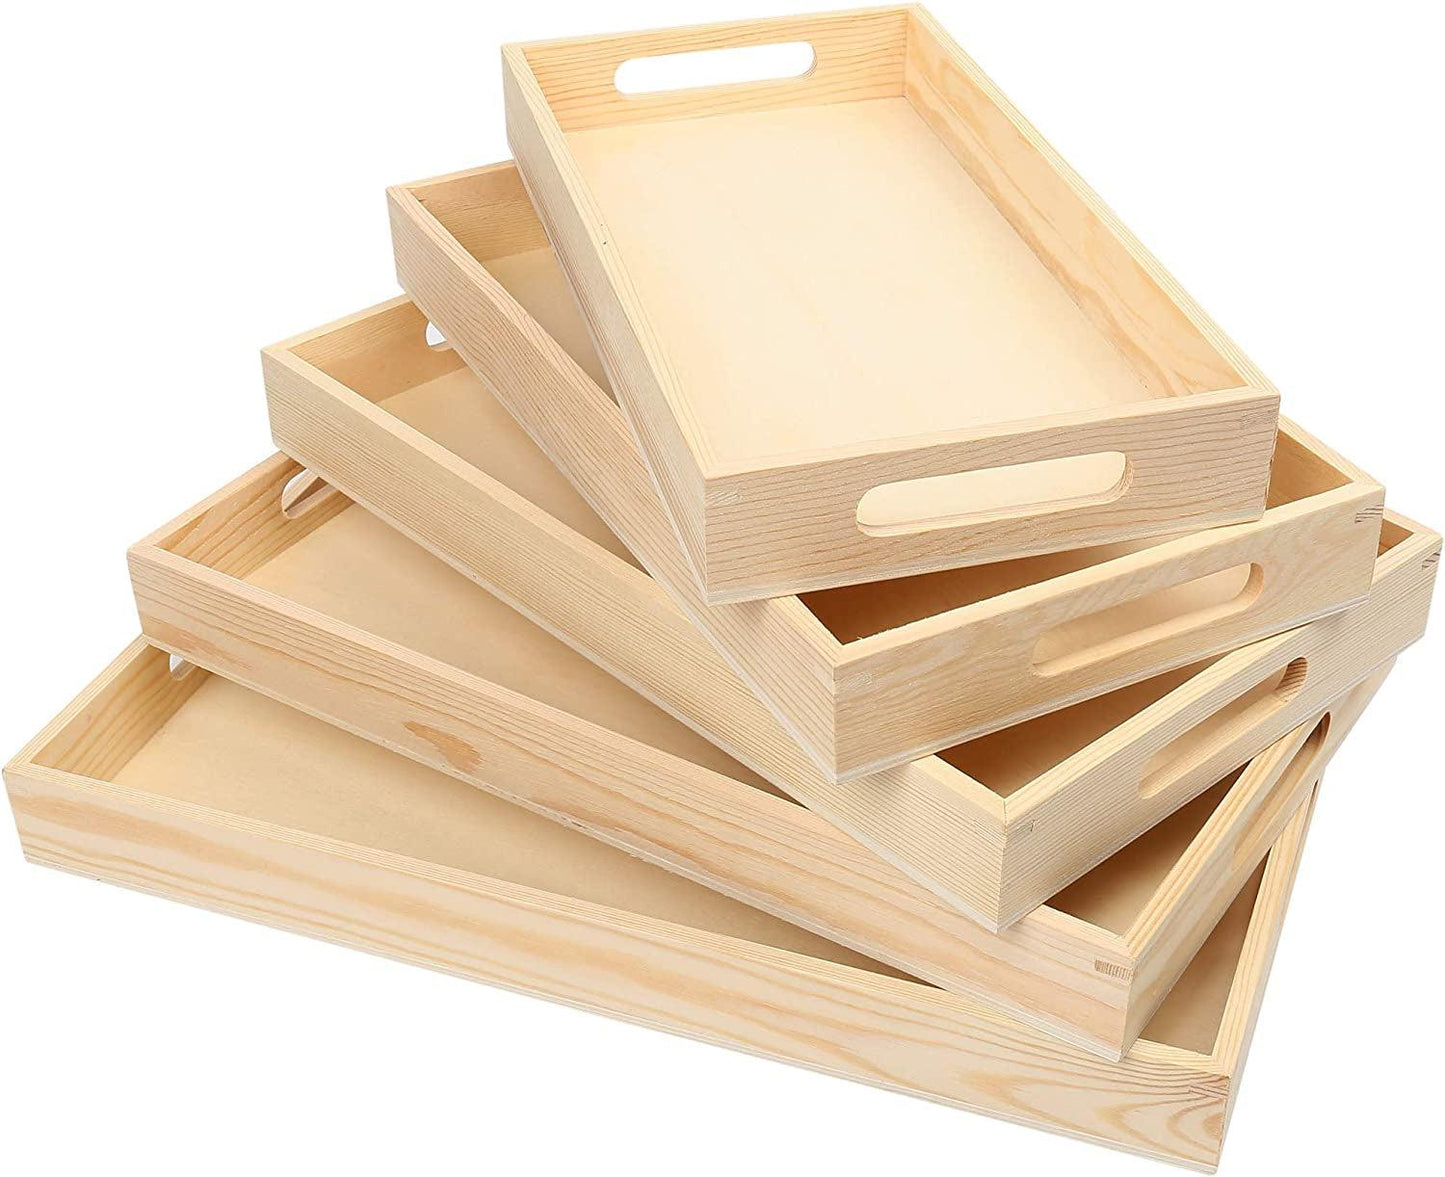 5PC Wooden Nested Serving Trays, Unfinished Natural Wood Trays with Handles, for Craft and Decor, Food Organizer - WoodArtSupply